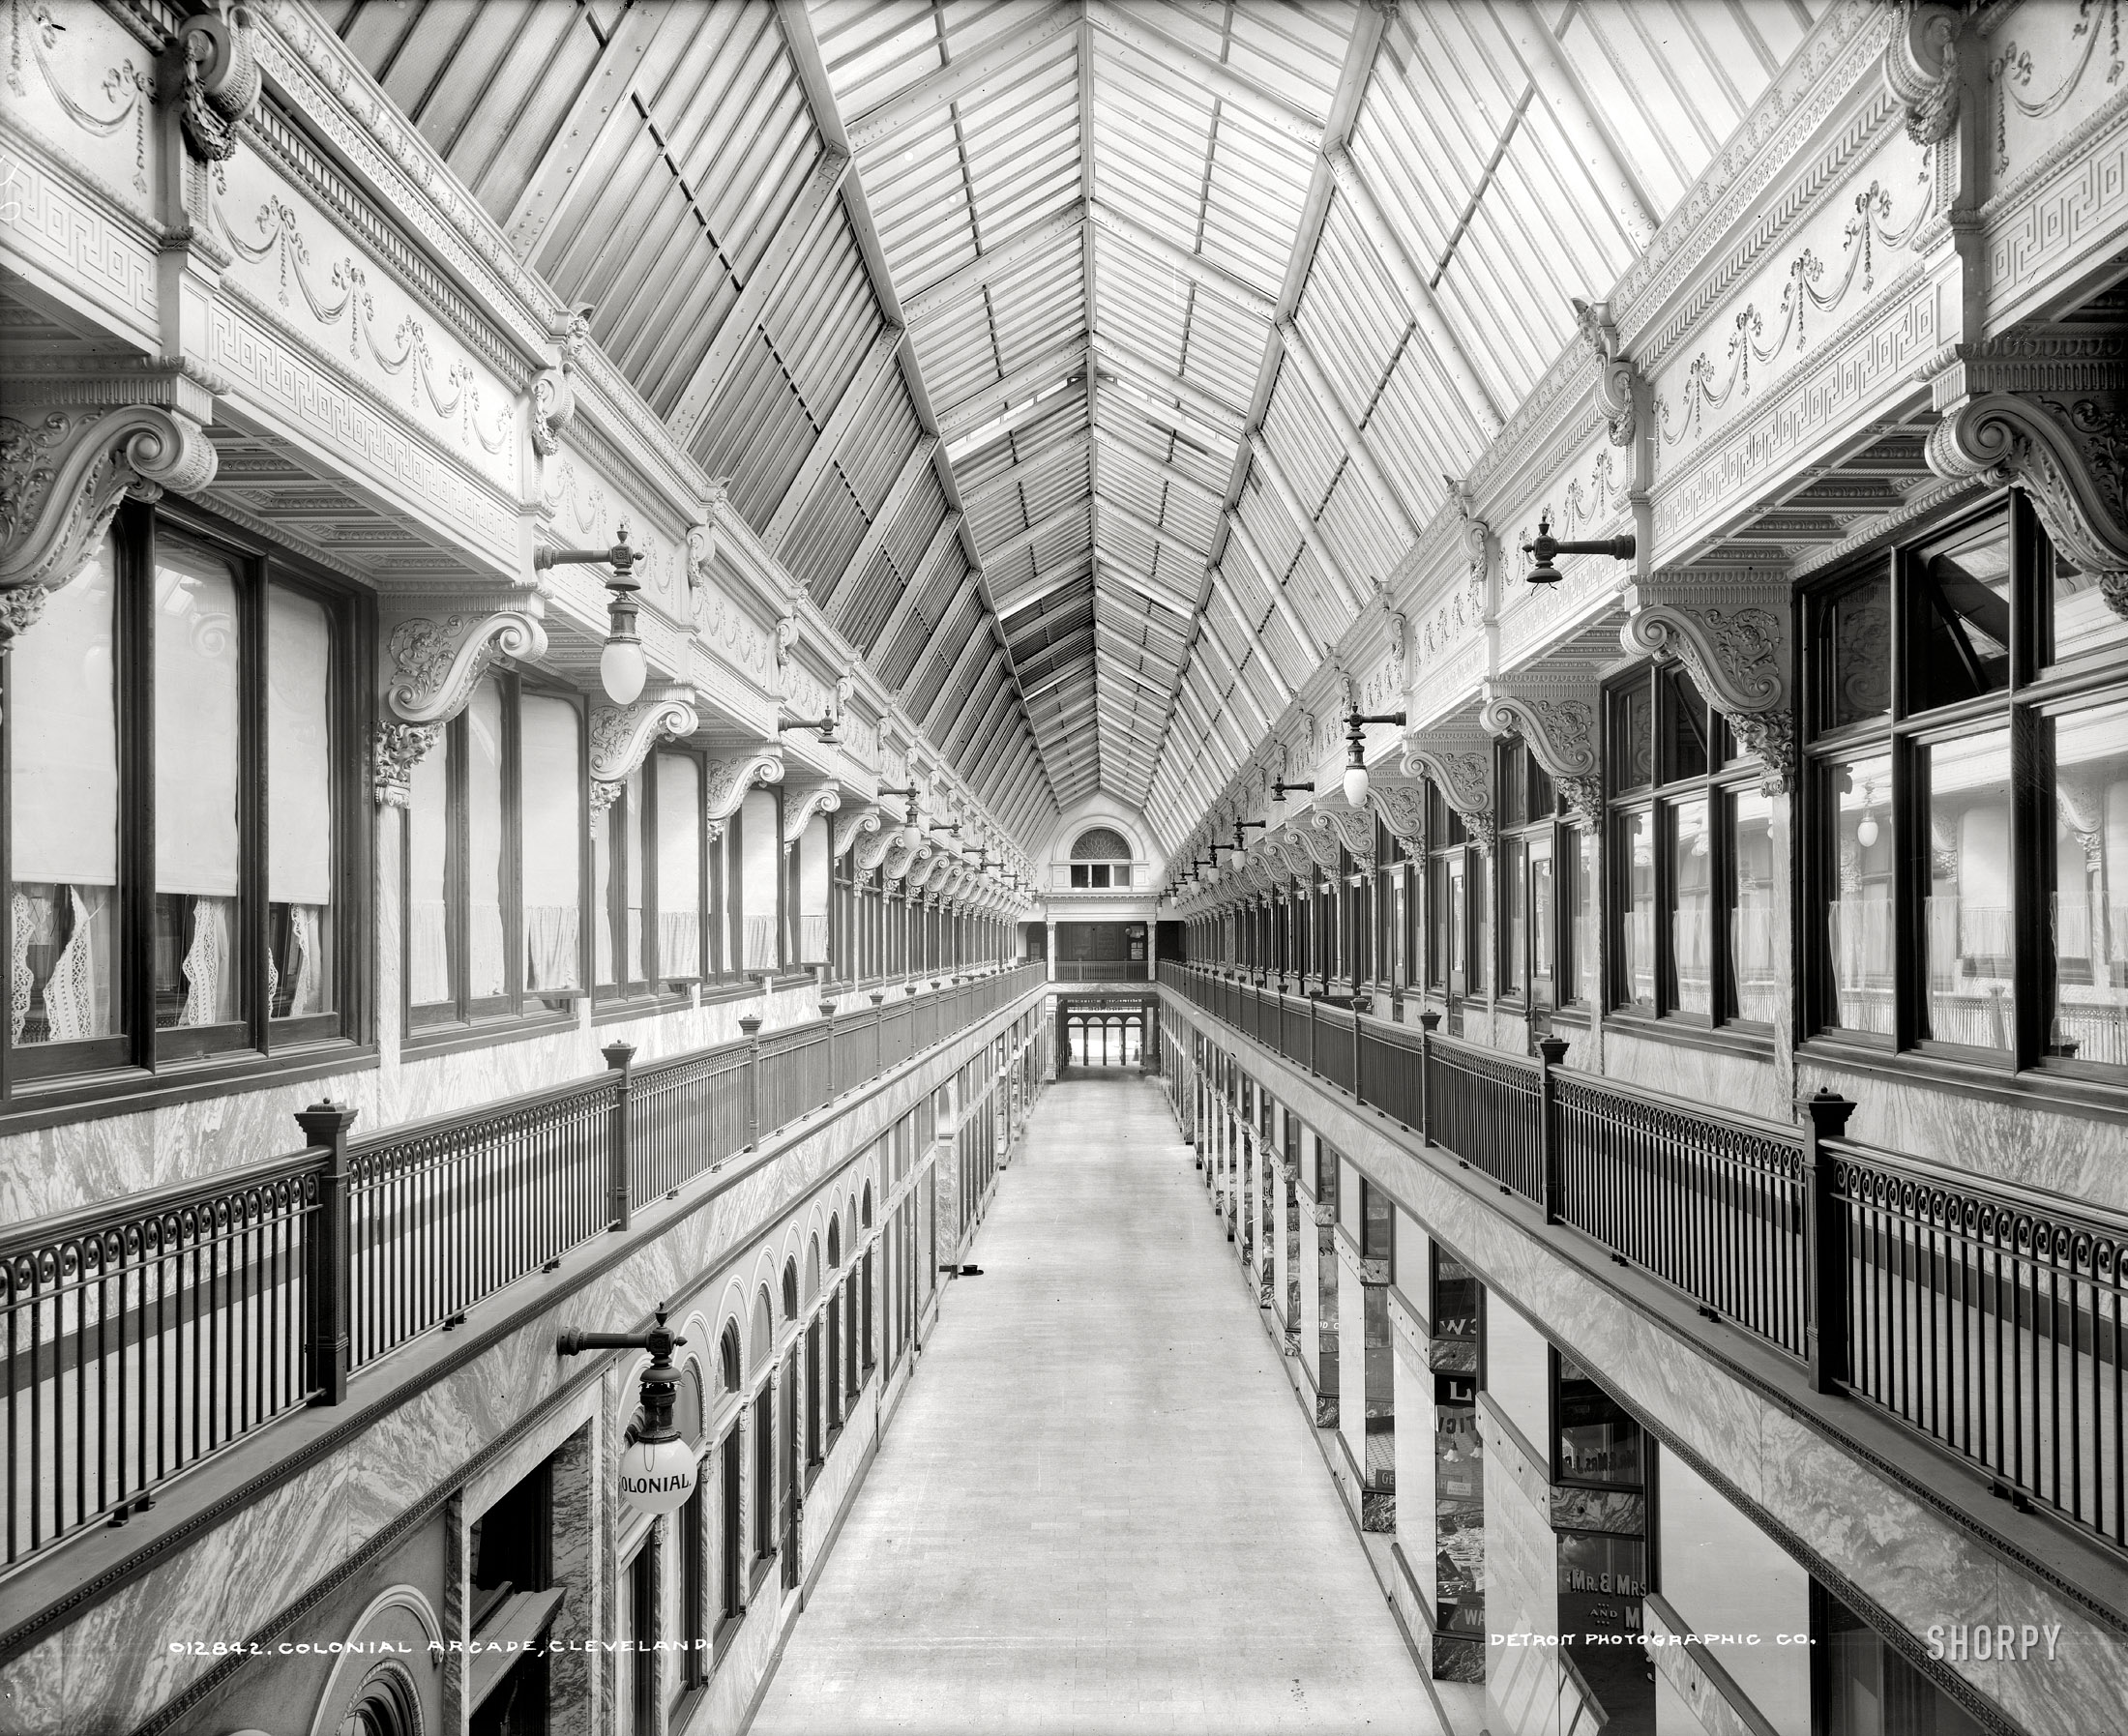 Circa 1900. "Colonial Arcade, Cleveland." Retail arcade in the Colonial Hotel. 8x10 inch dry plate glass negative, Detroit Publishing Company. View full size.